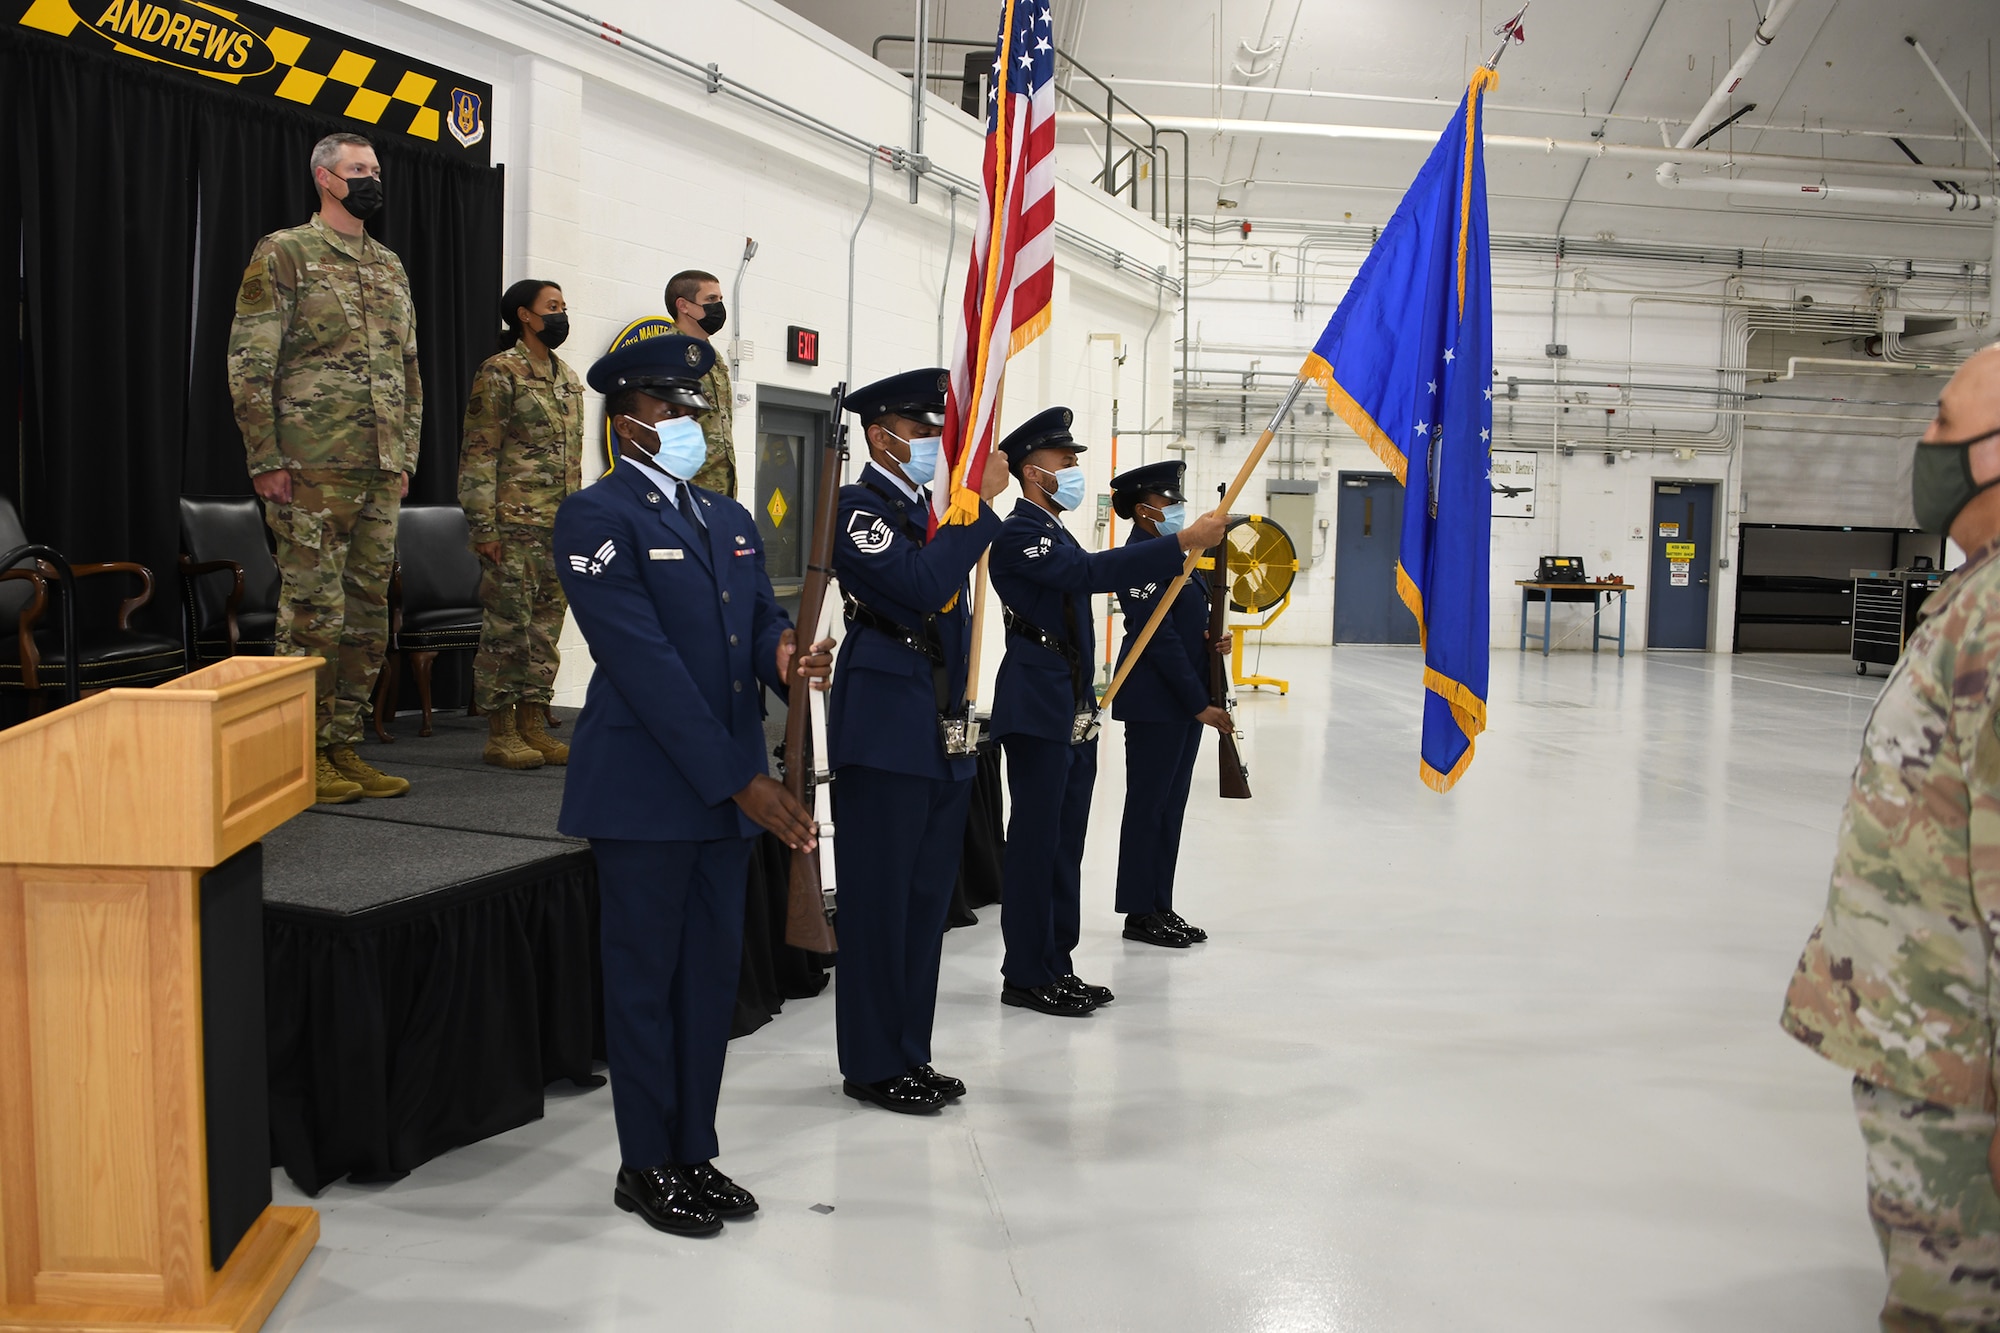 Members of the 459th Air Refueling Wing Honor Guard present the colors at a change of command ceremony, October 3, 2020, at Joint Base Andrews, Md. The wing’s honor guard supports changes of command, commander calls, retirement ceremonies and more. (U.S. Air Force photo by SrA Andreaa Phillips)